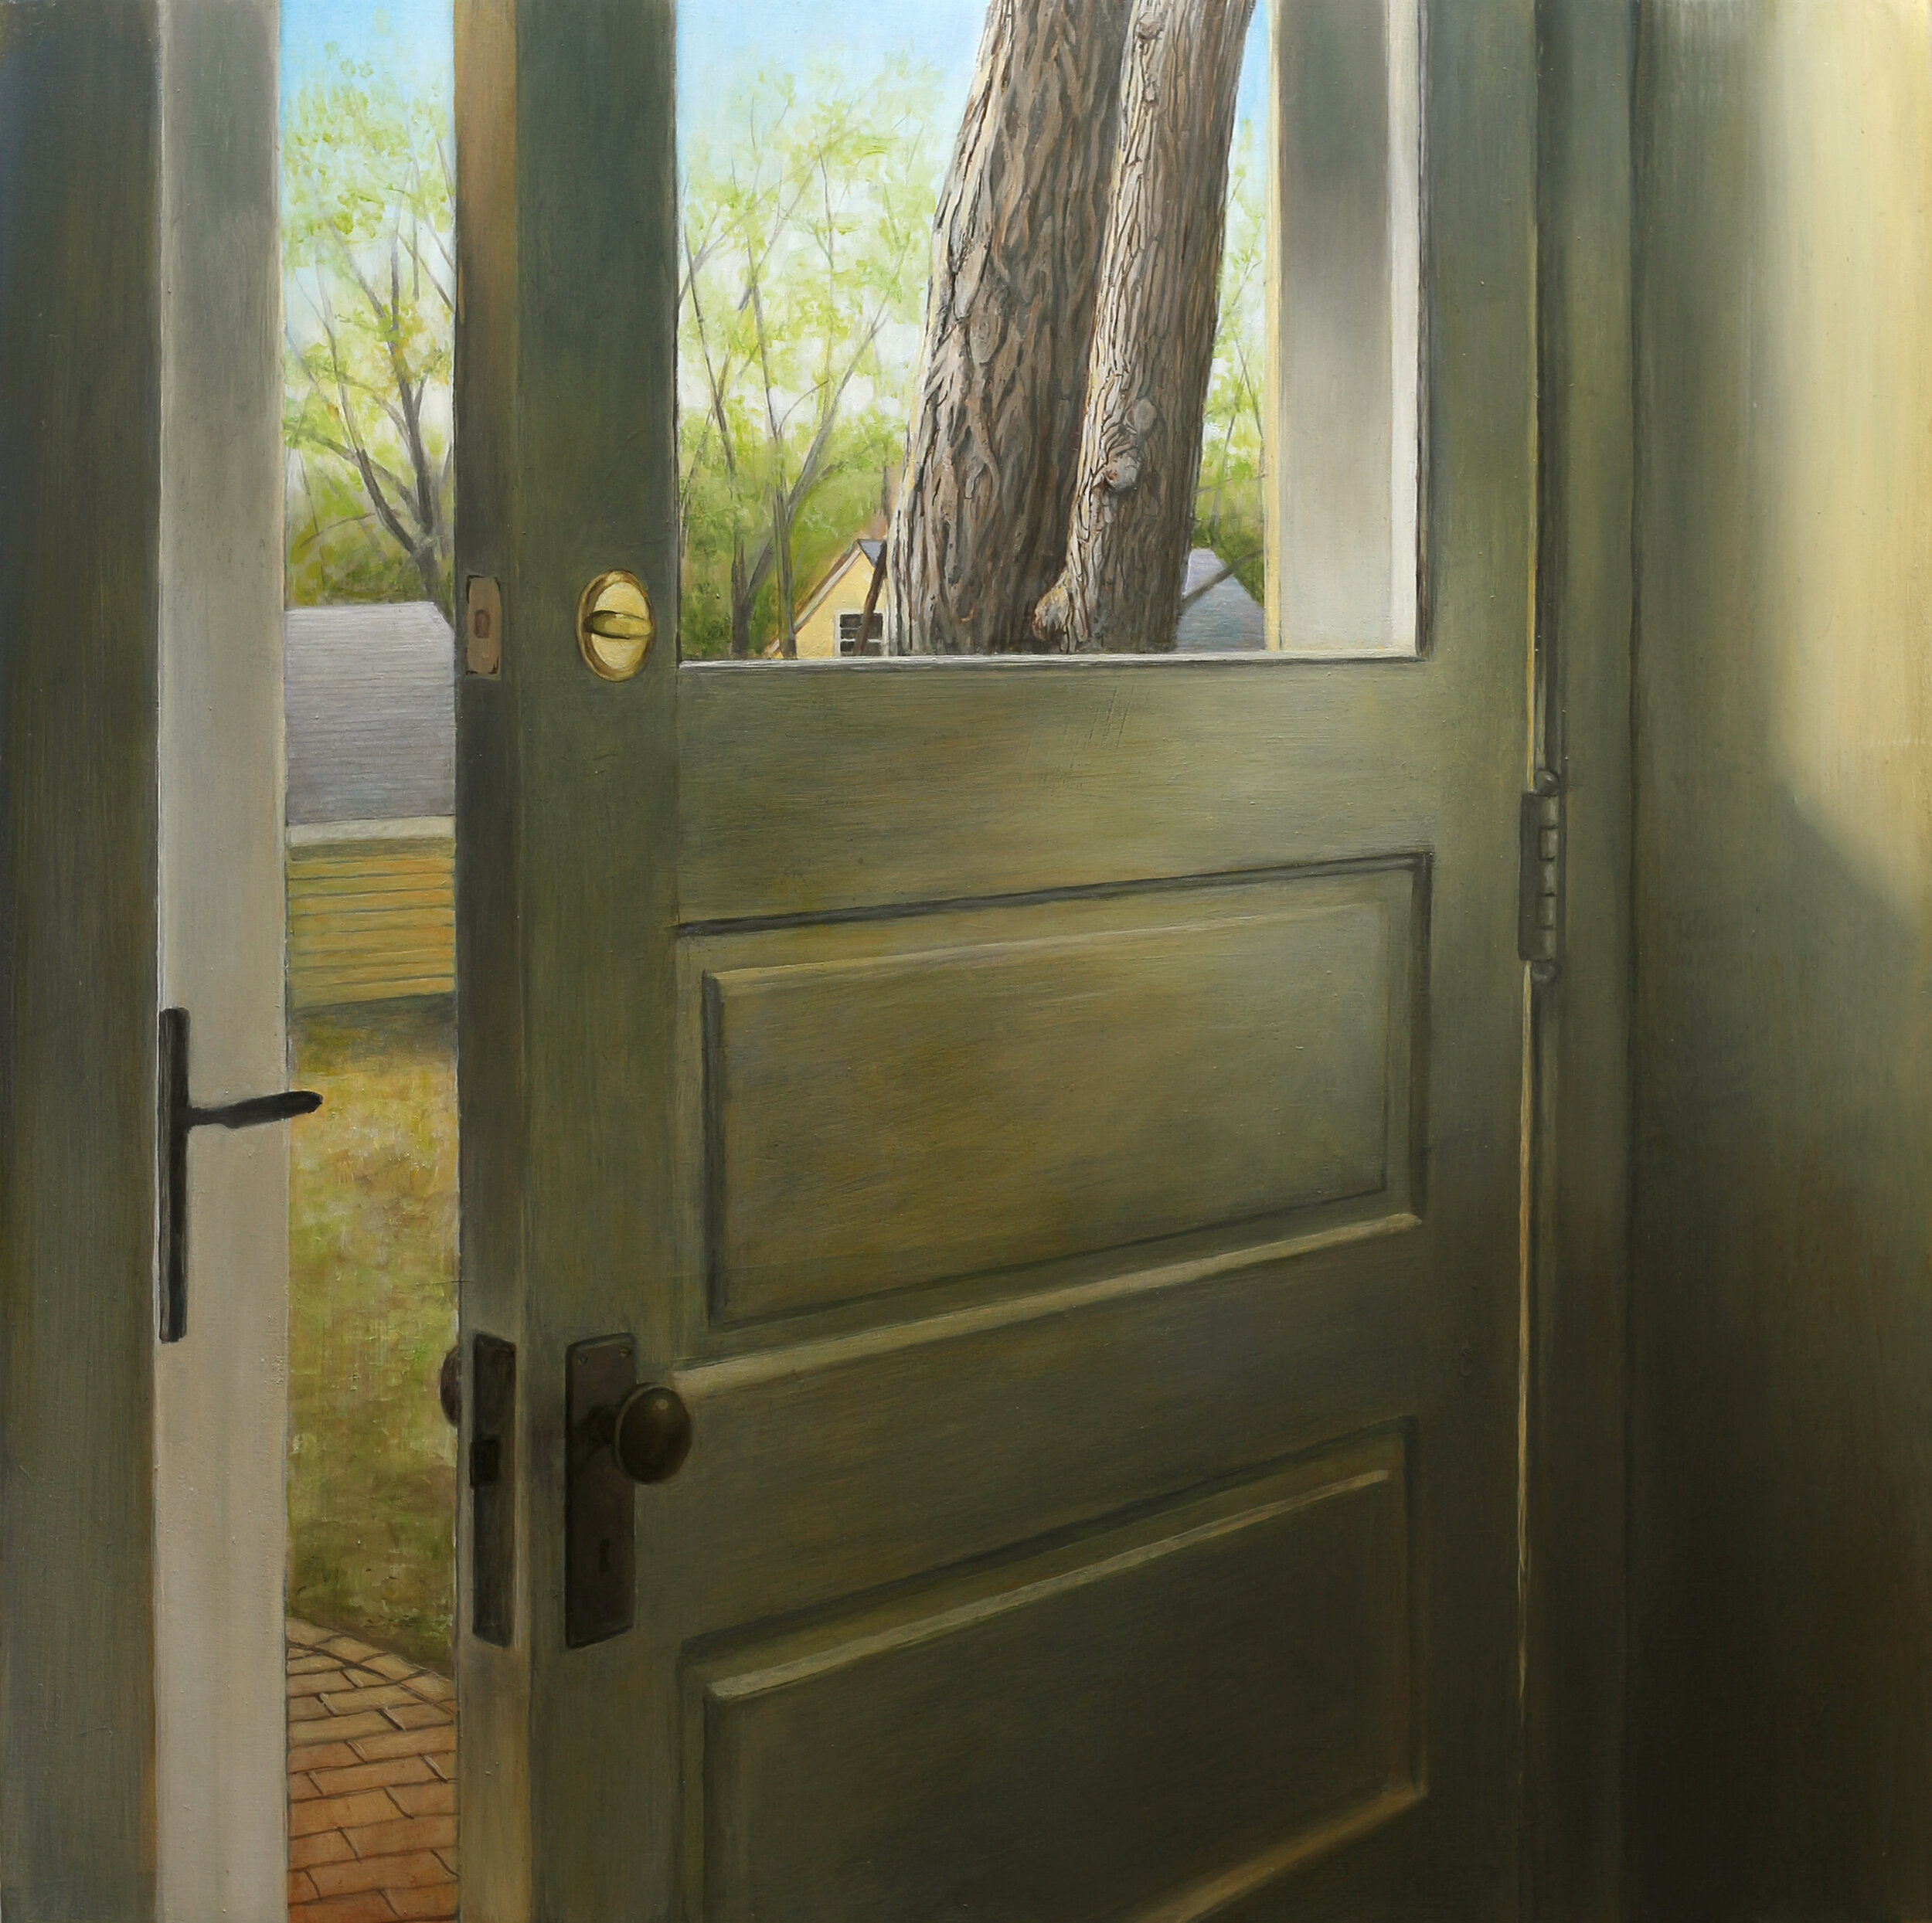   Spring Door   2020  Oil on panel  16 x 16 inches       